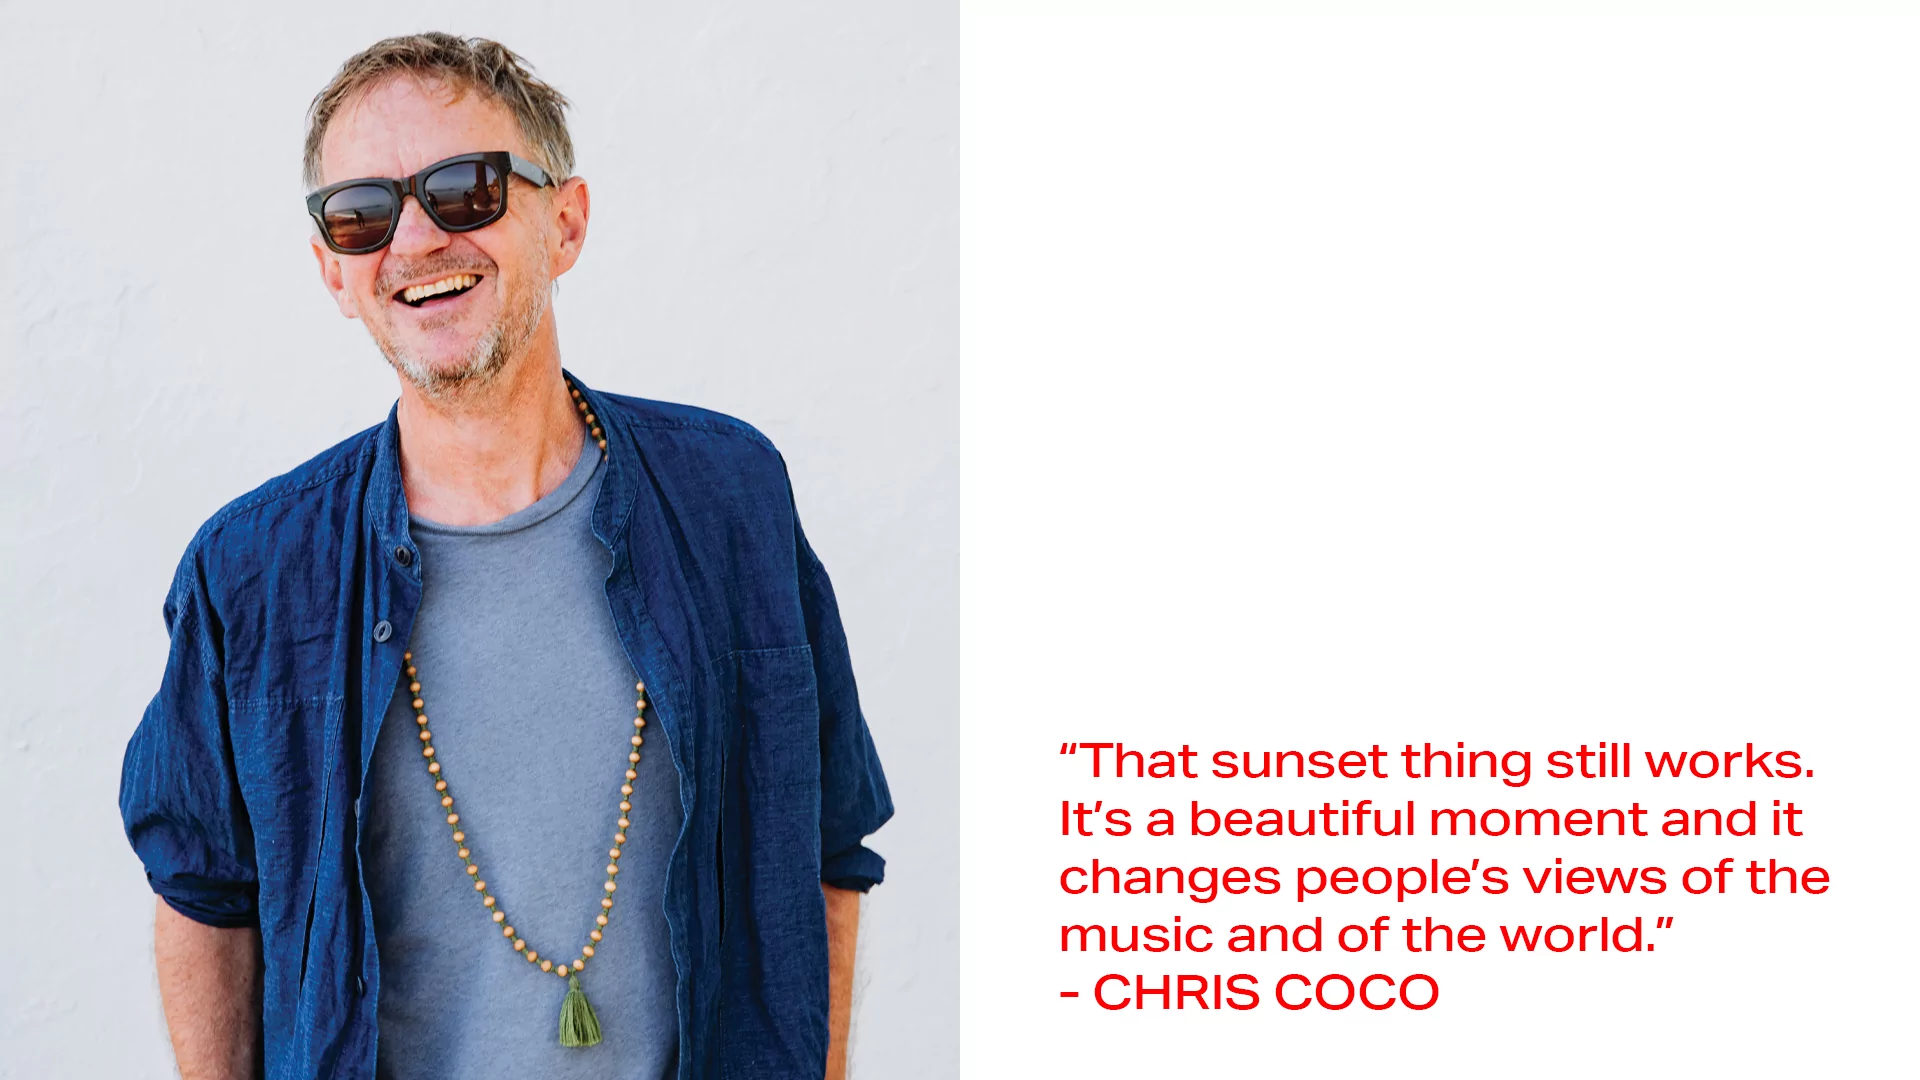 Photo of Chris Coco wearing a blue shirt and sunglasses next to a quote in red writing